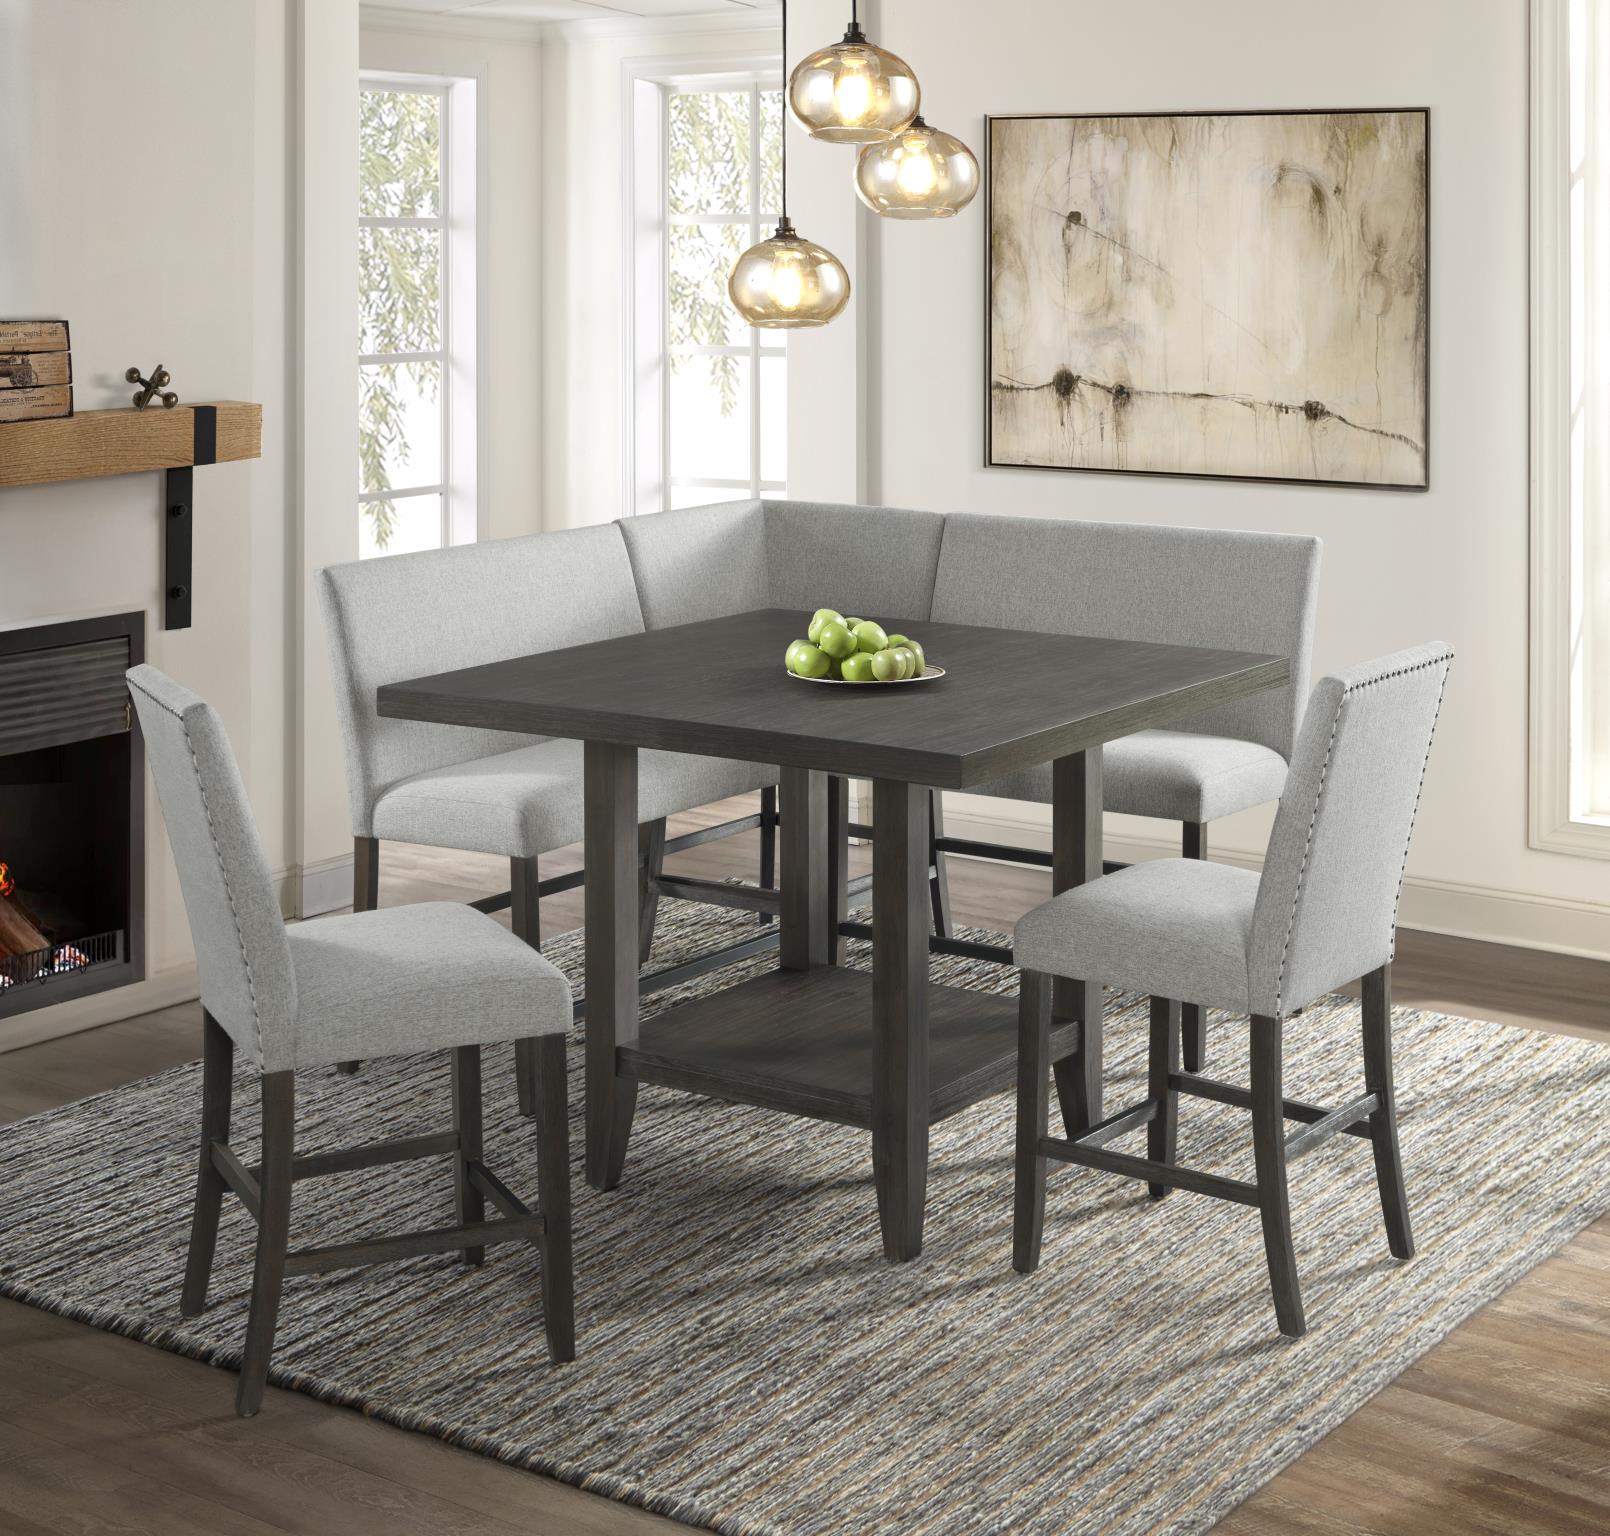 Weekly Or Monthly Classic Casual Complete Corner Nook Dining Set Community Furnishings